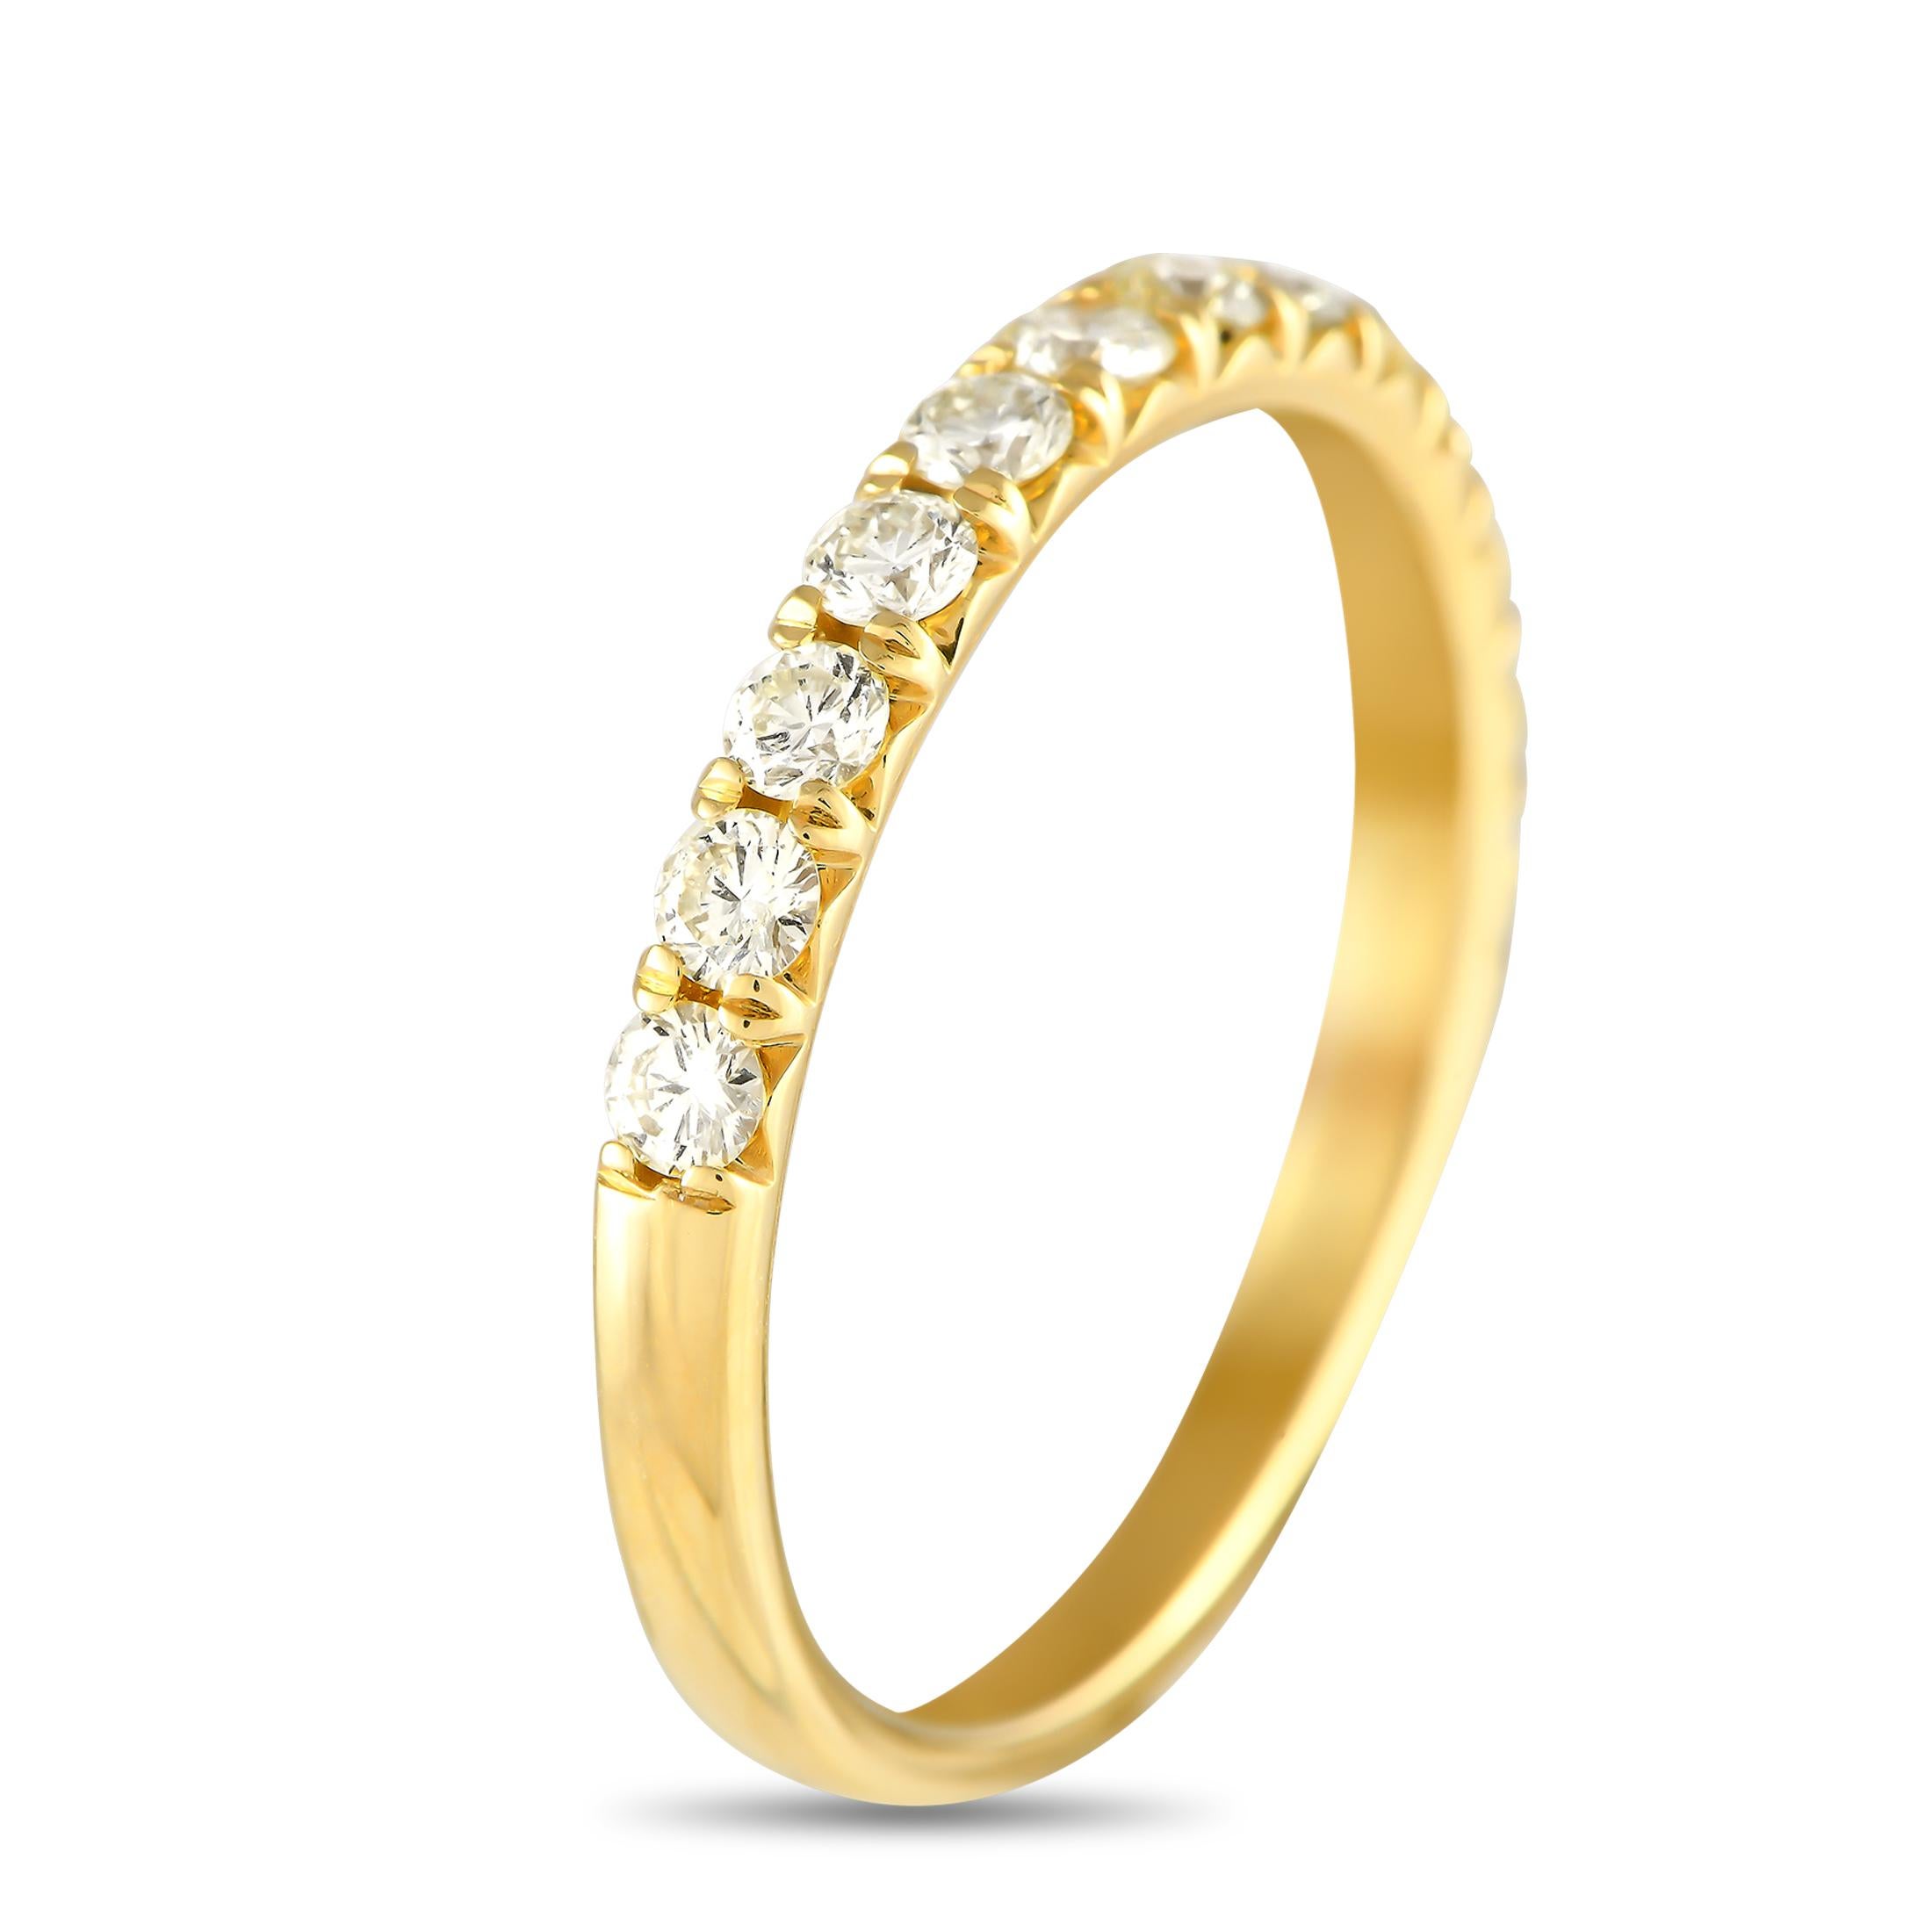 Simple, elegant, and understated, this luxury ring is ideal for everyday wear. The top of the 18K yellow gold setting  which features a 2mm wide band and a 1mm top height  comes to life thanks to a series of diamonds totaling 0.55 carats.This